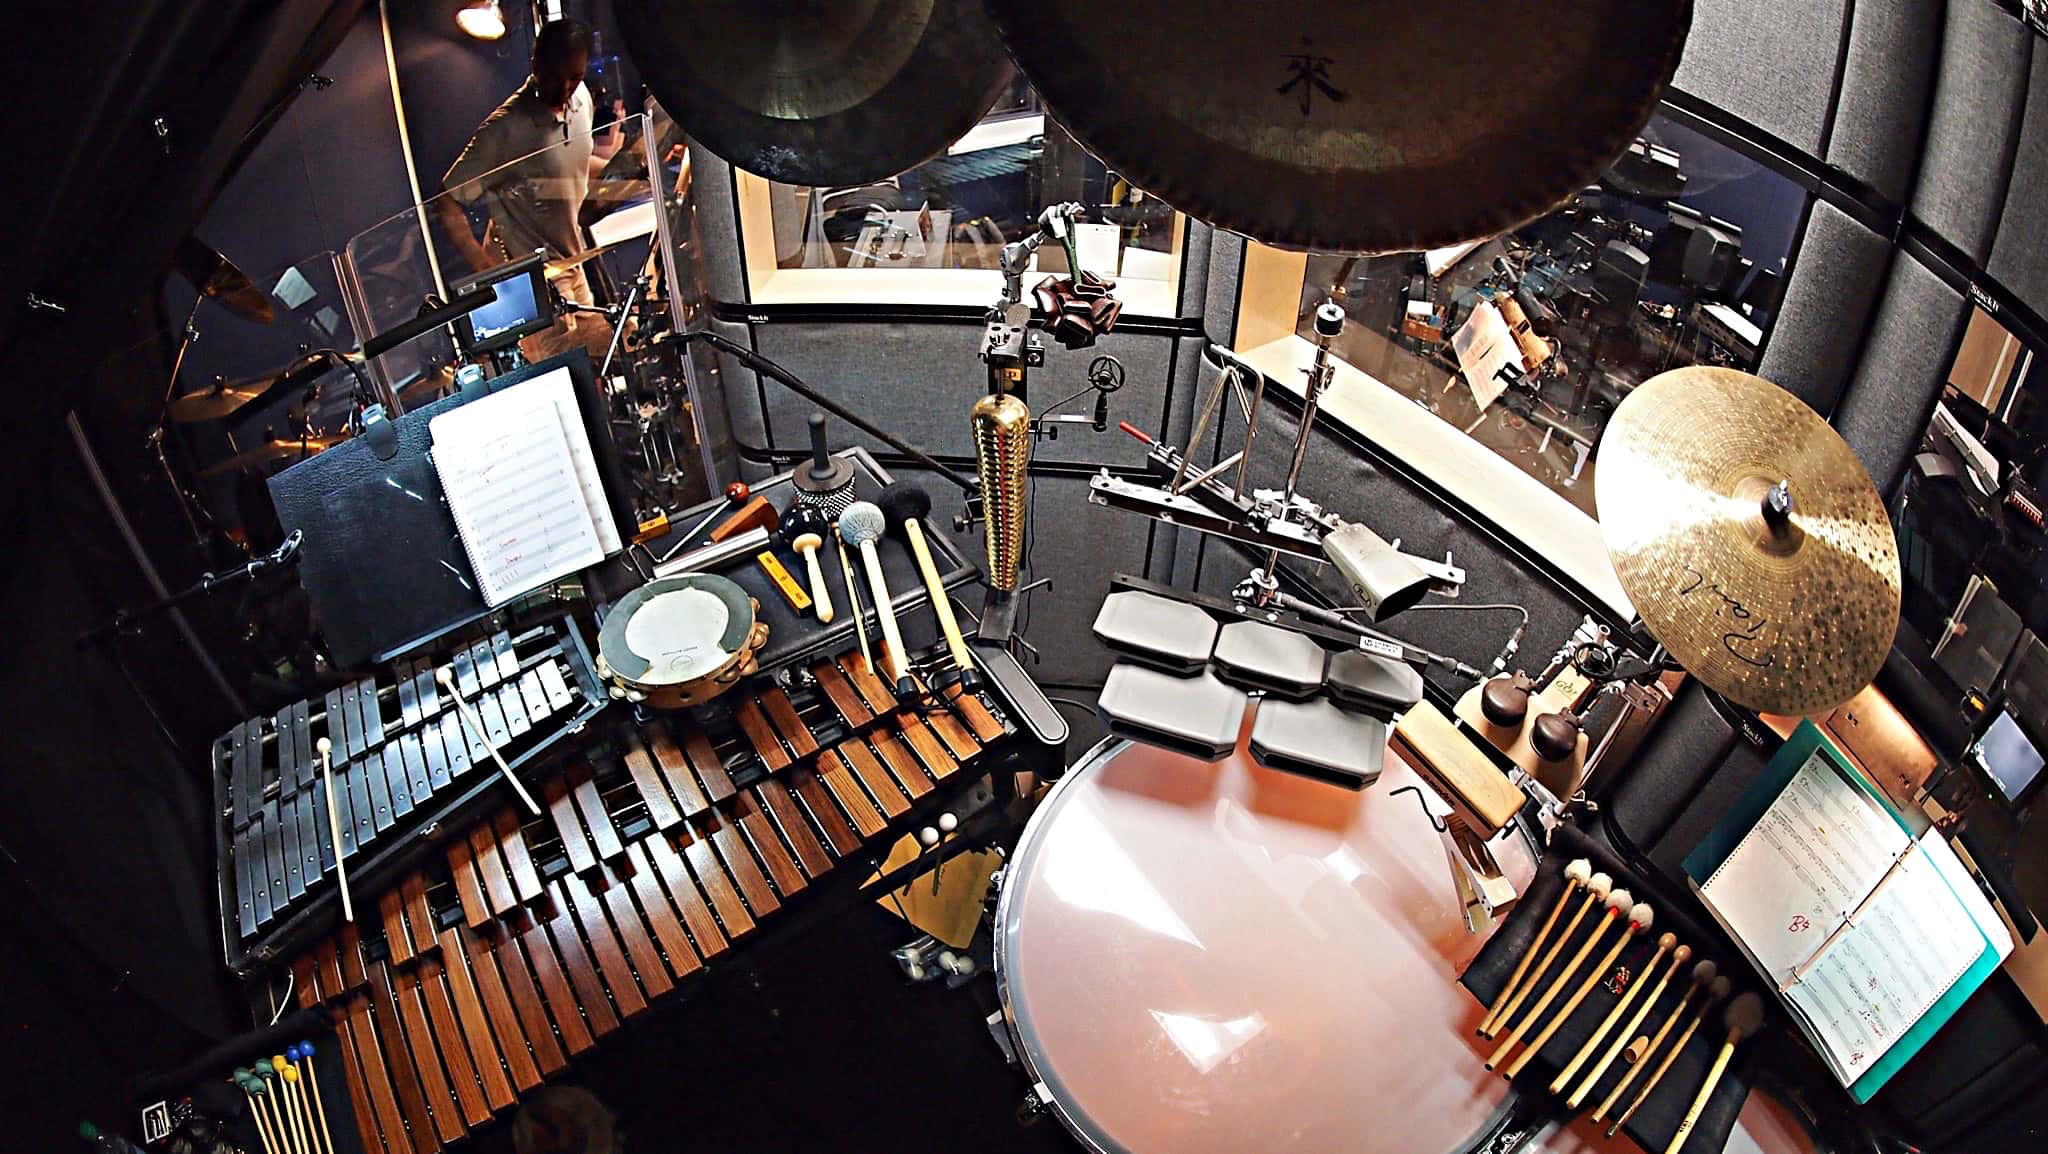 Dave Roth’s percussion setup for the Broadway revival of Cats at the Neil Simon Theatre.